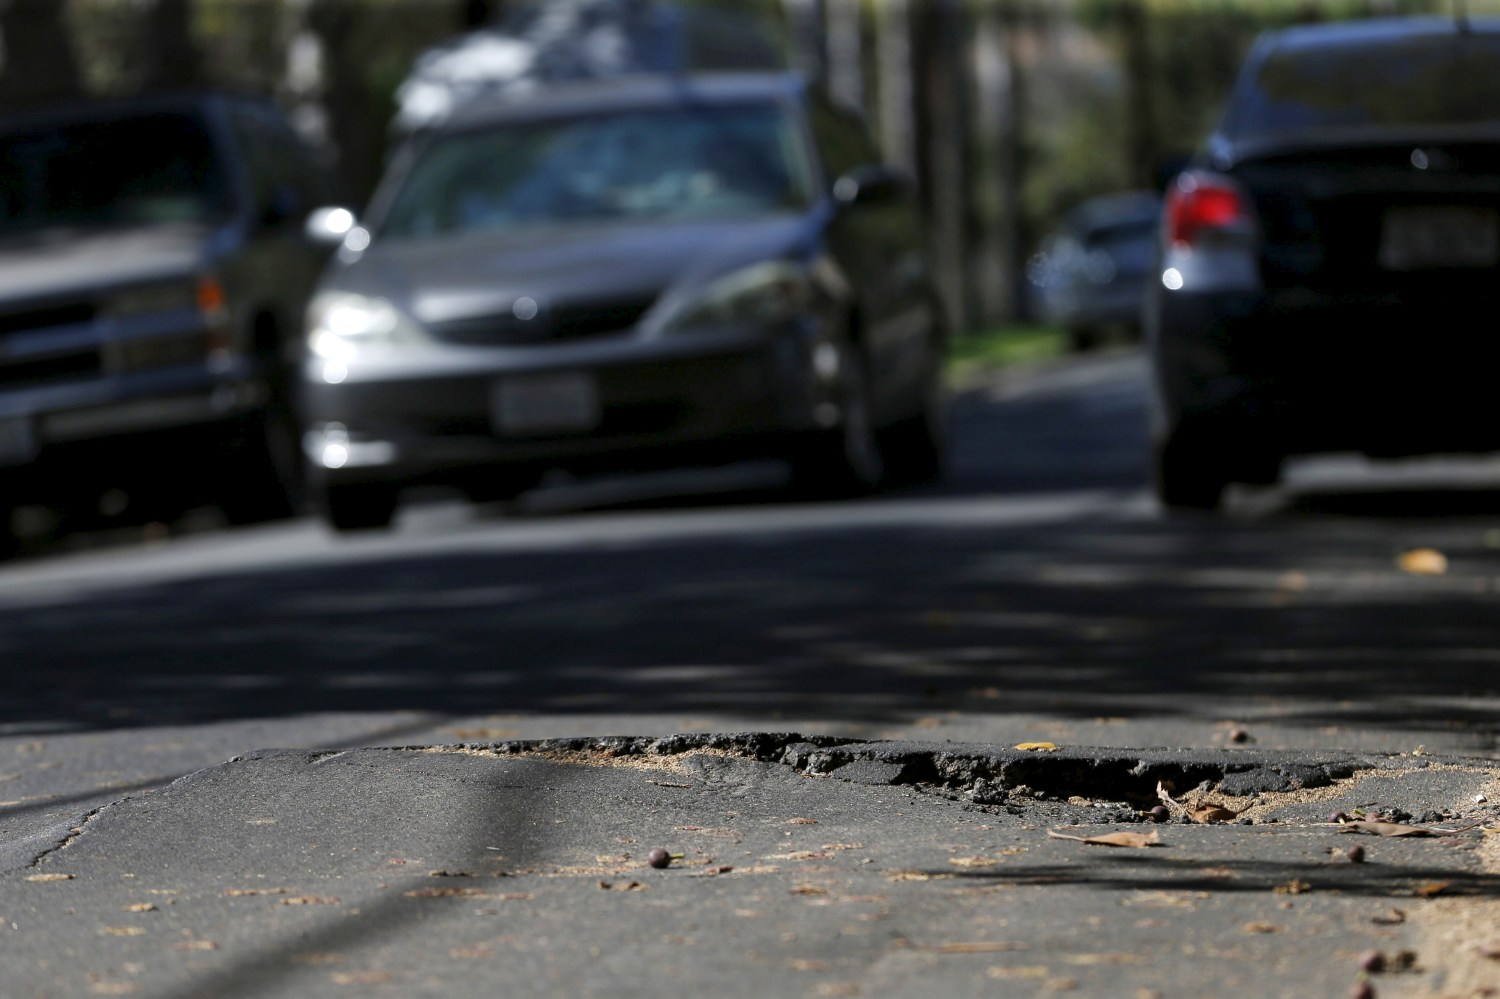 A pothole is pictured on the street of Los Angeles, California